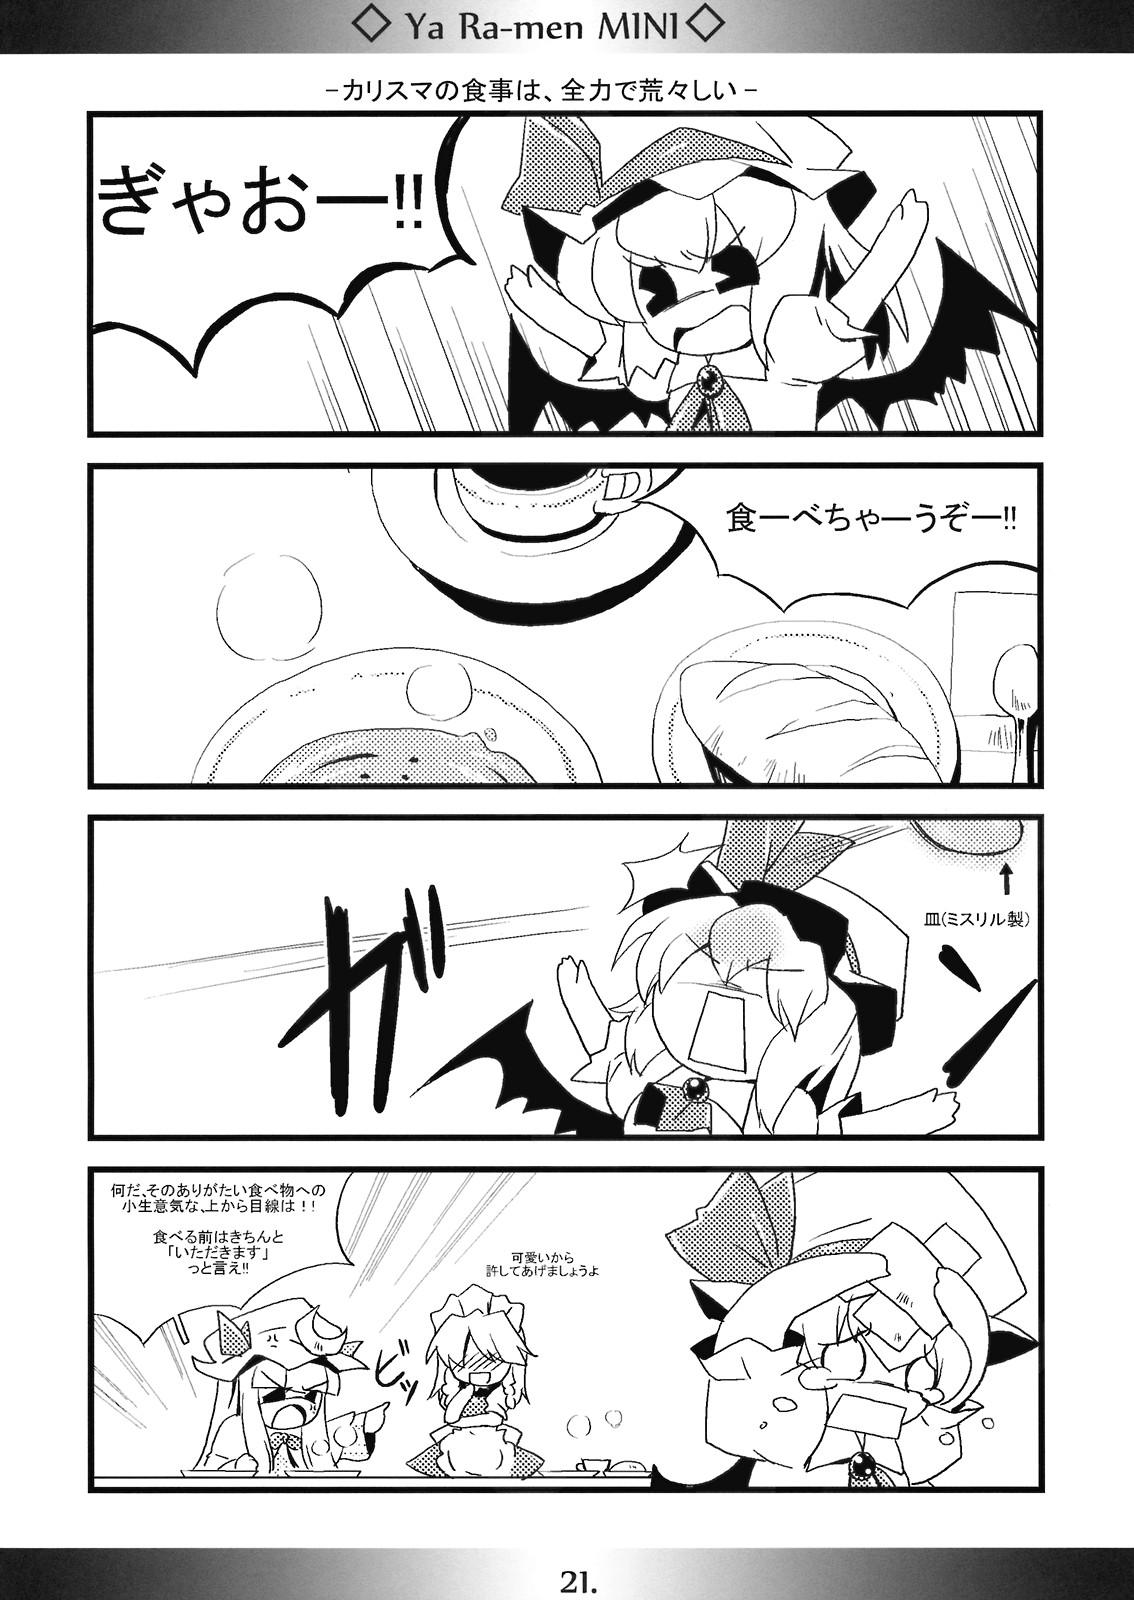 Pussy Licking One-P.Platina - Touhou project Retro - Page 21